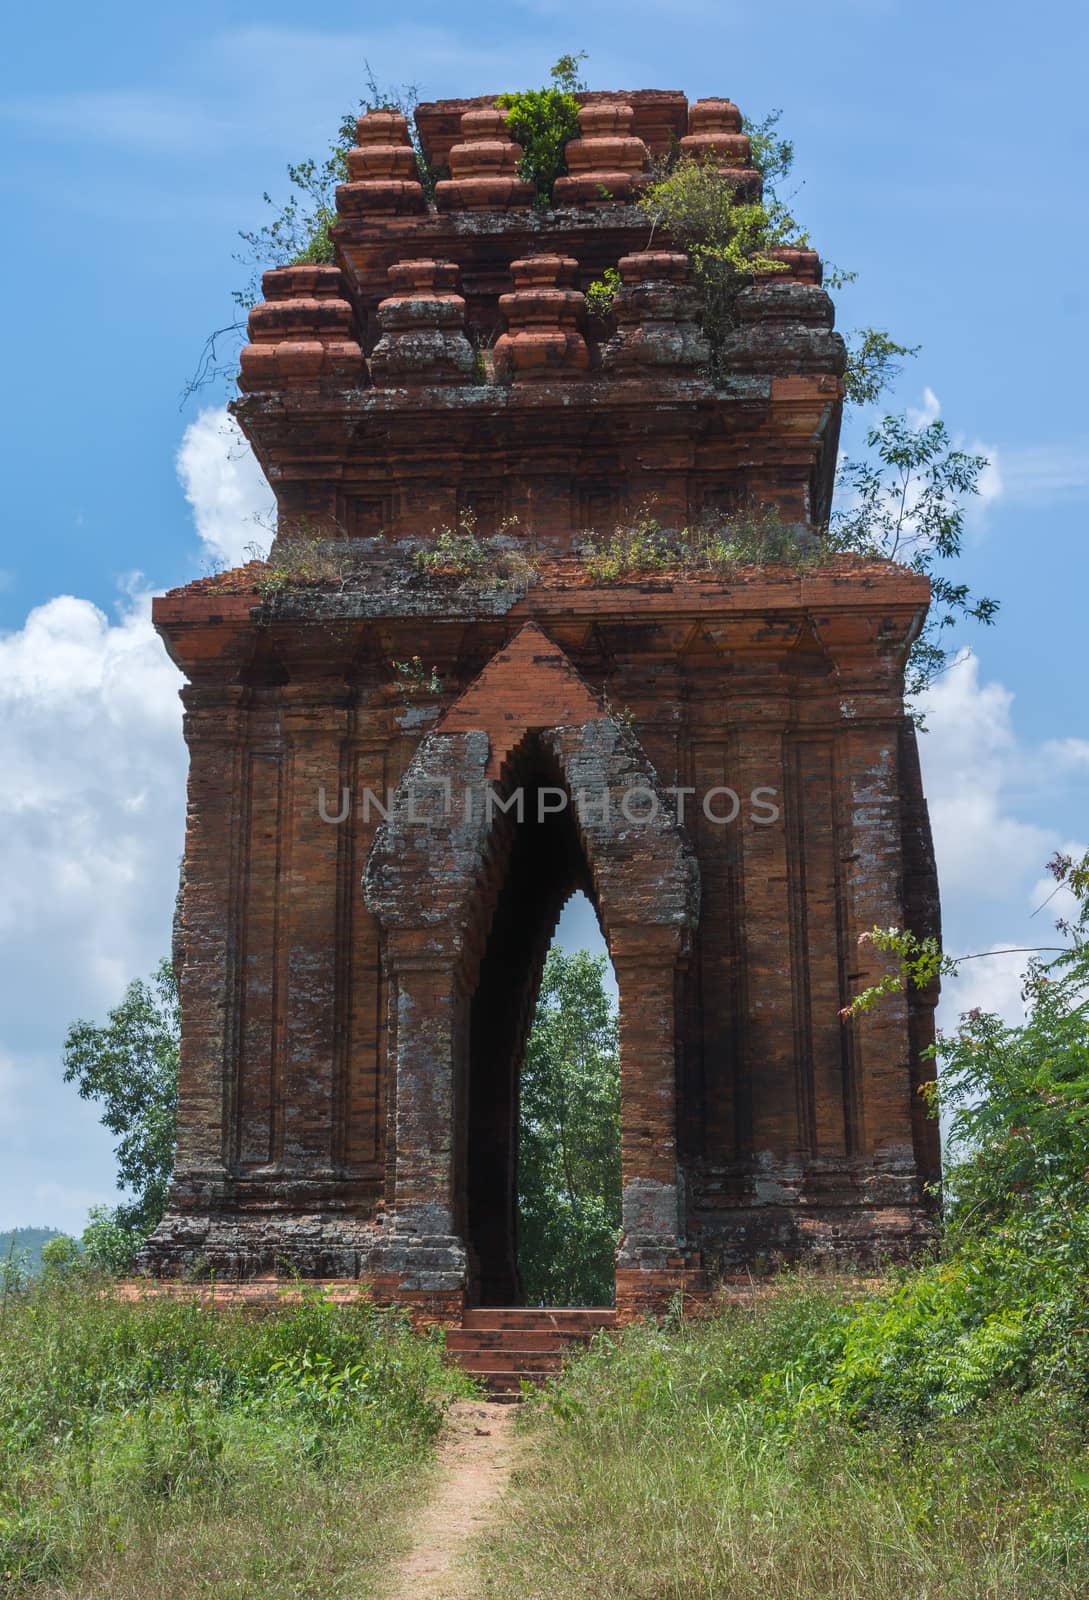 Vietnam, blue skies as seen through one of the Banh It Cham towers.